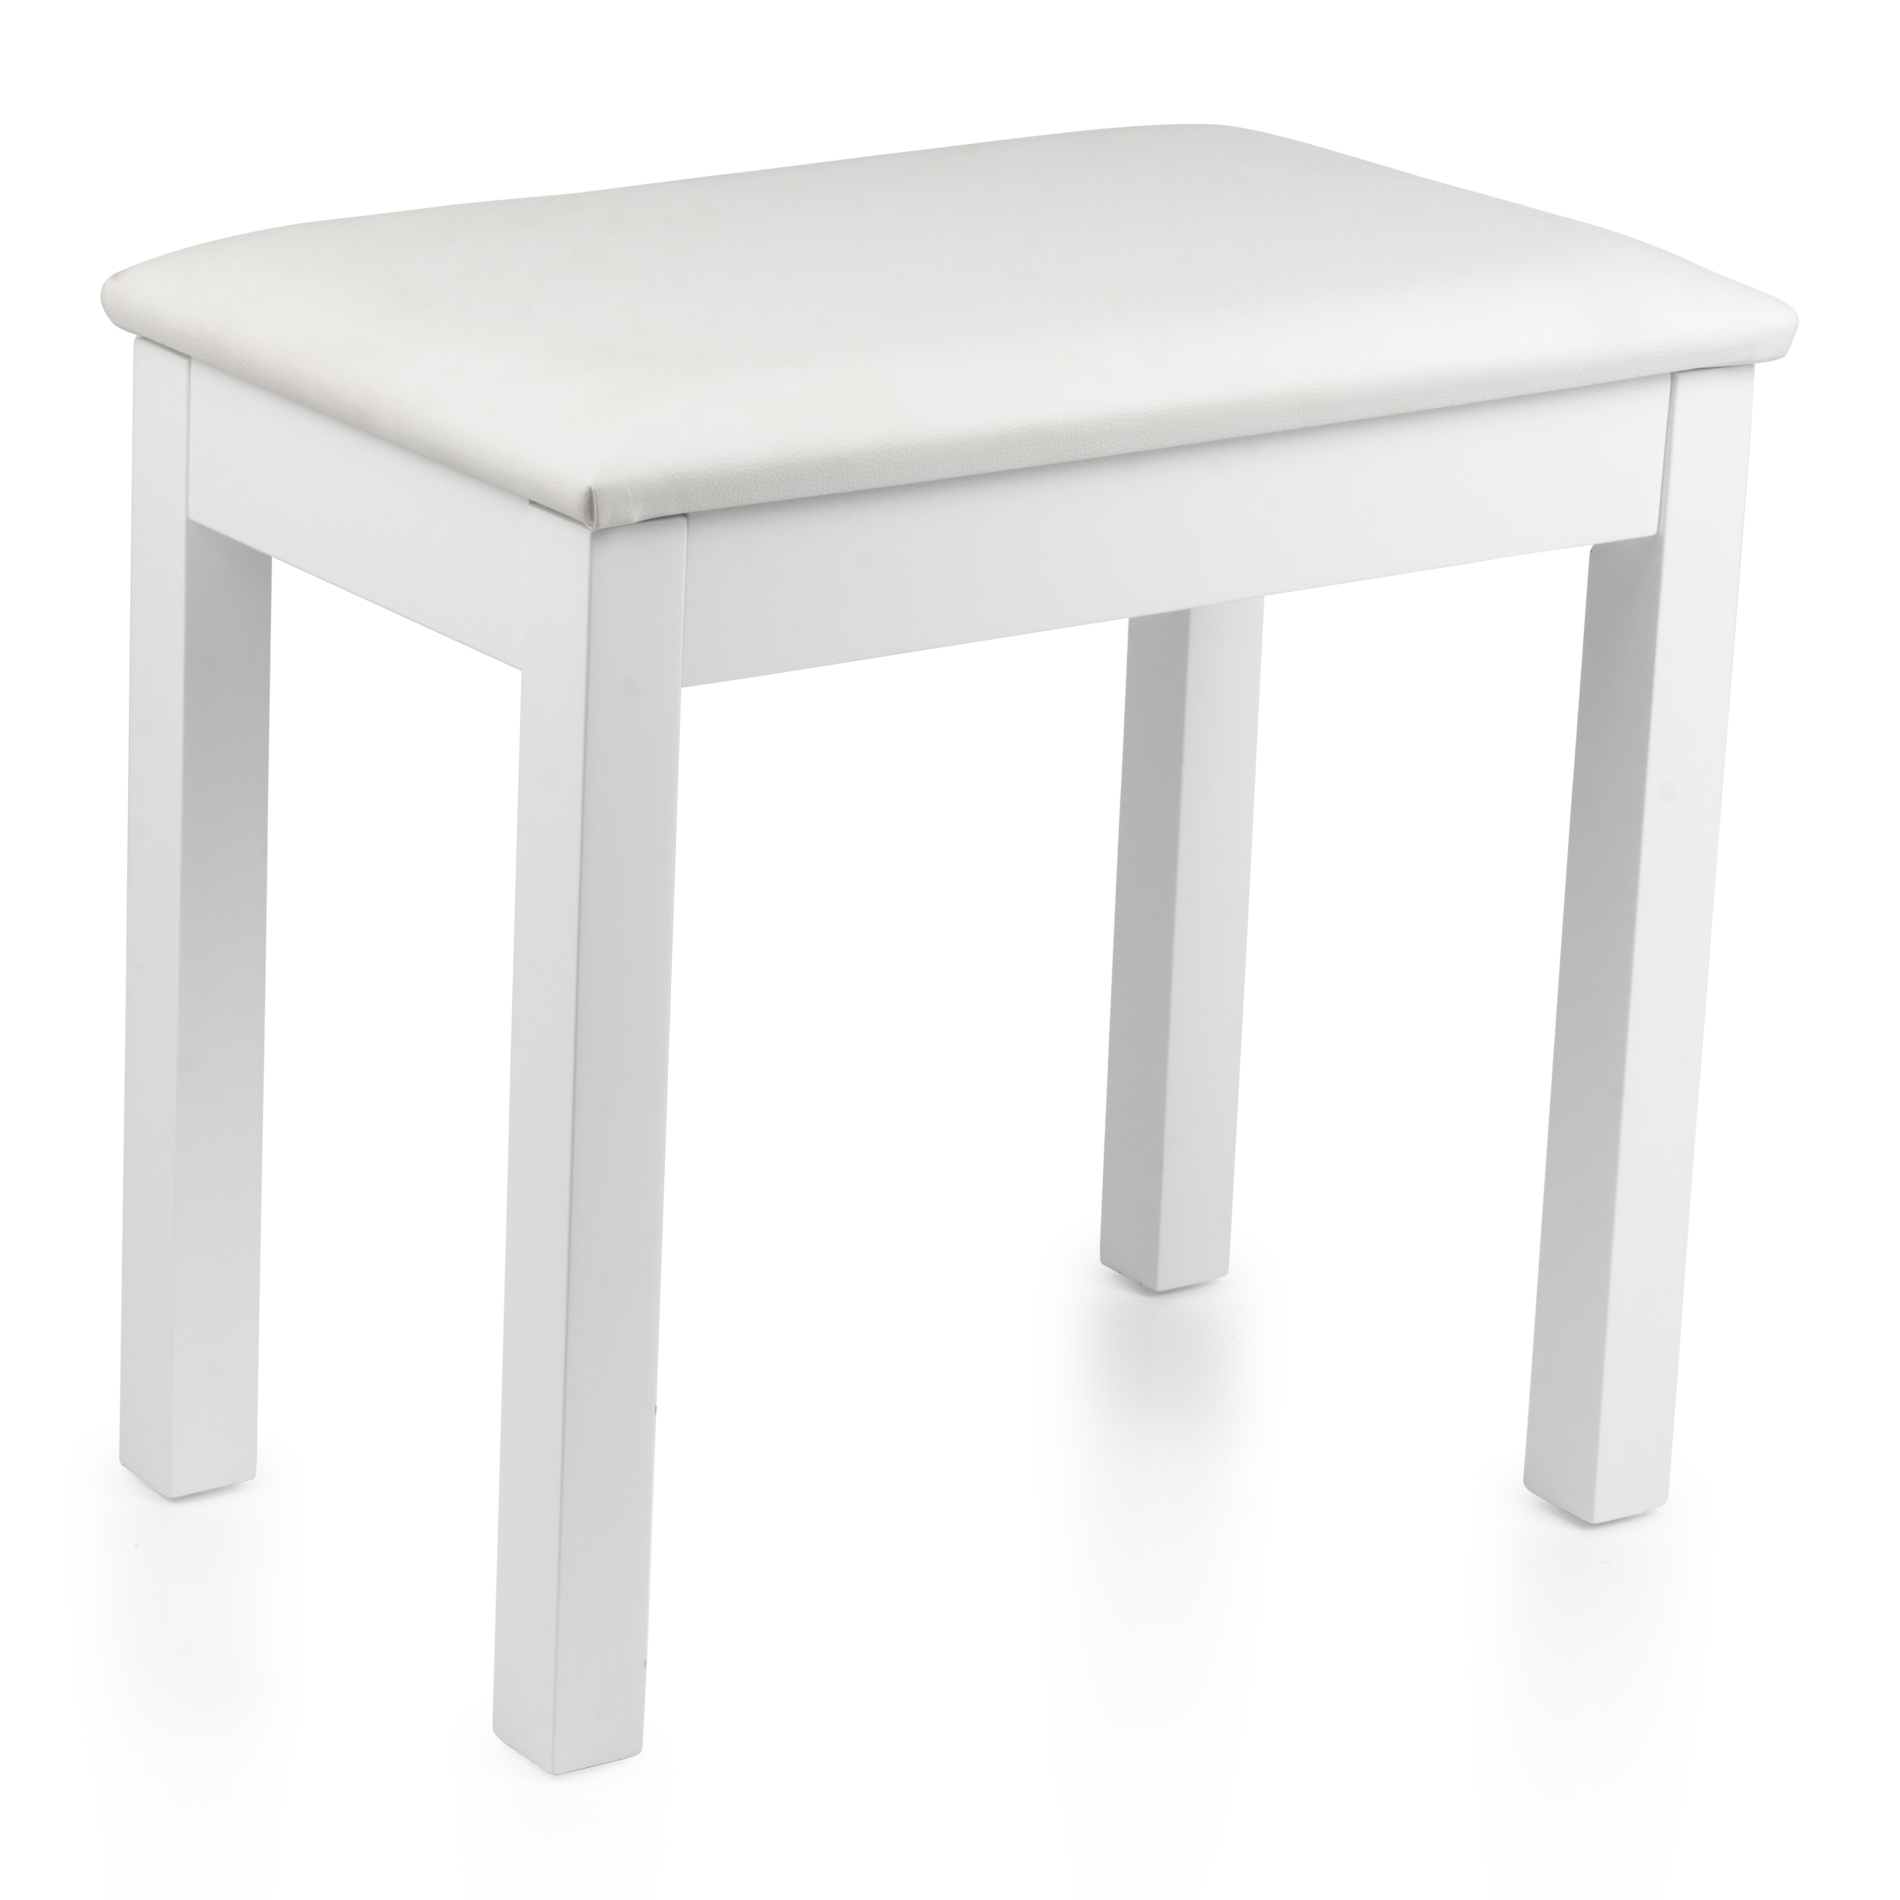 Traditional Wooden Piano Bench In White-GFW-KEYBENCH-WDWH